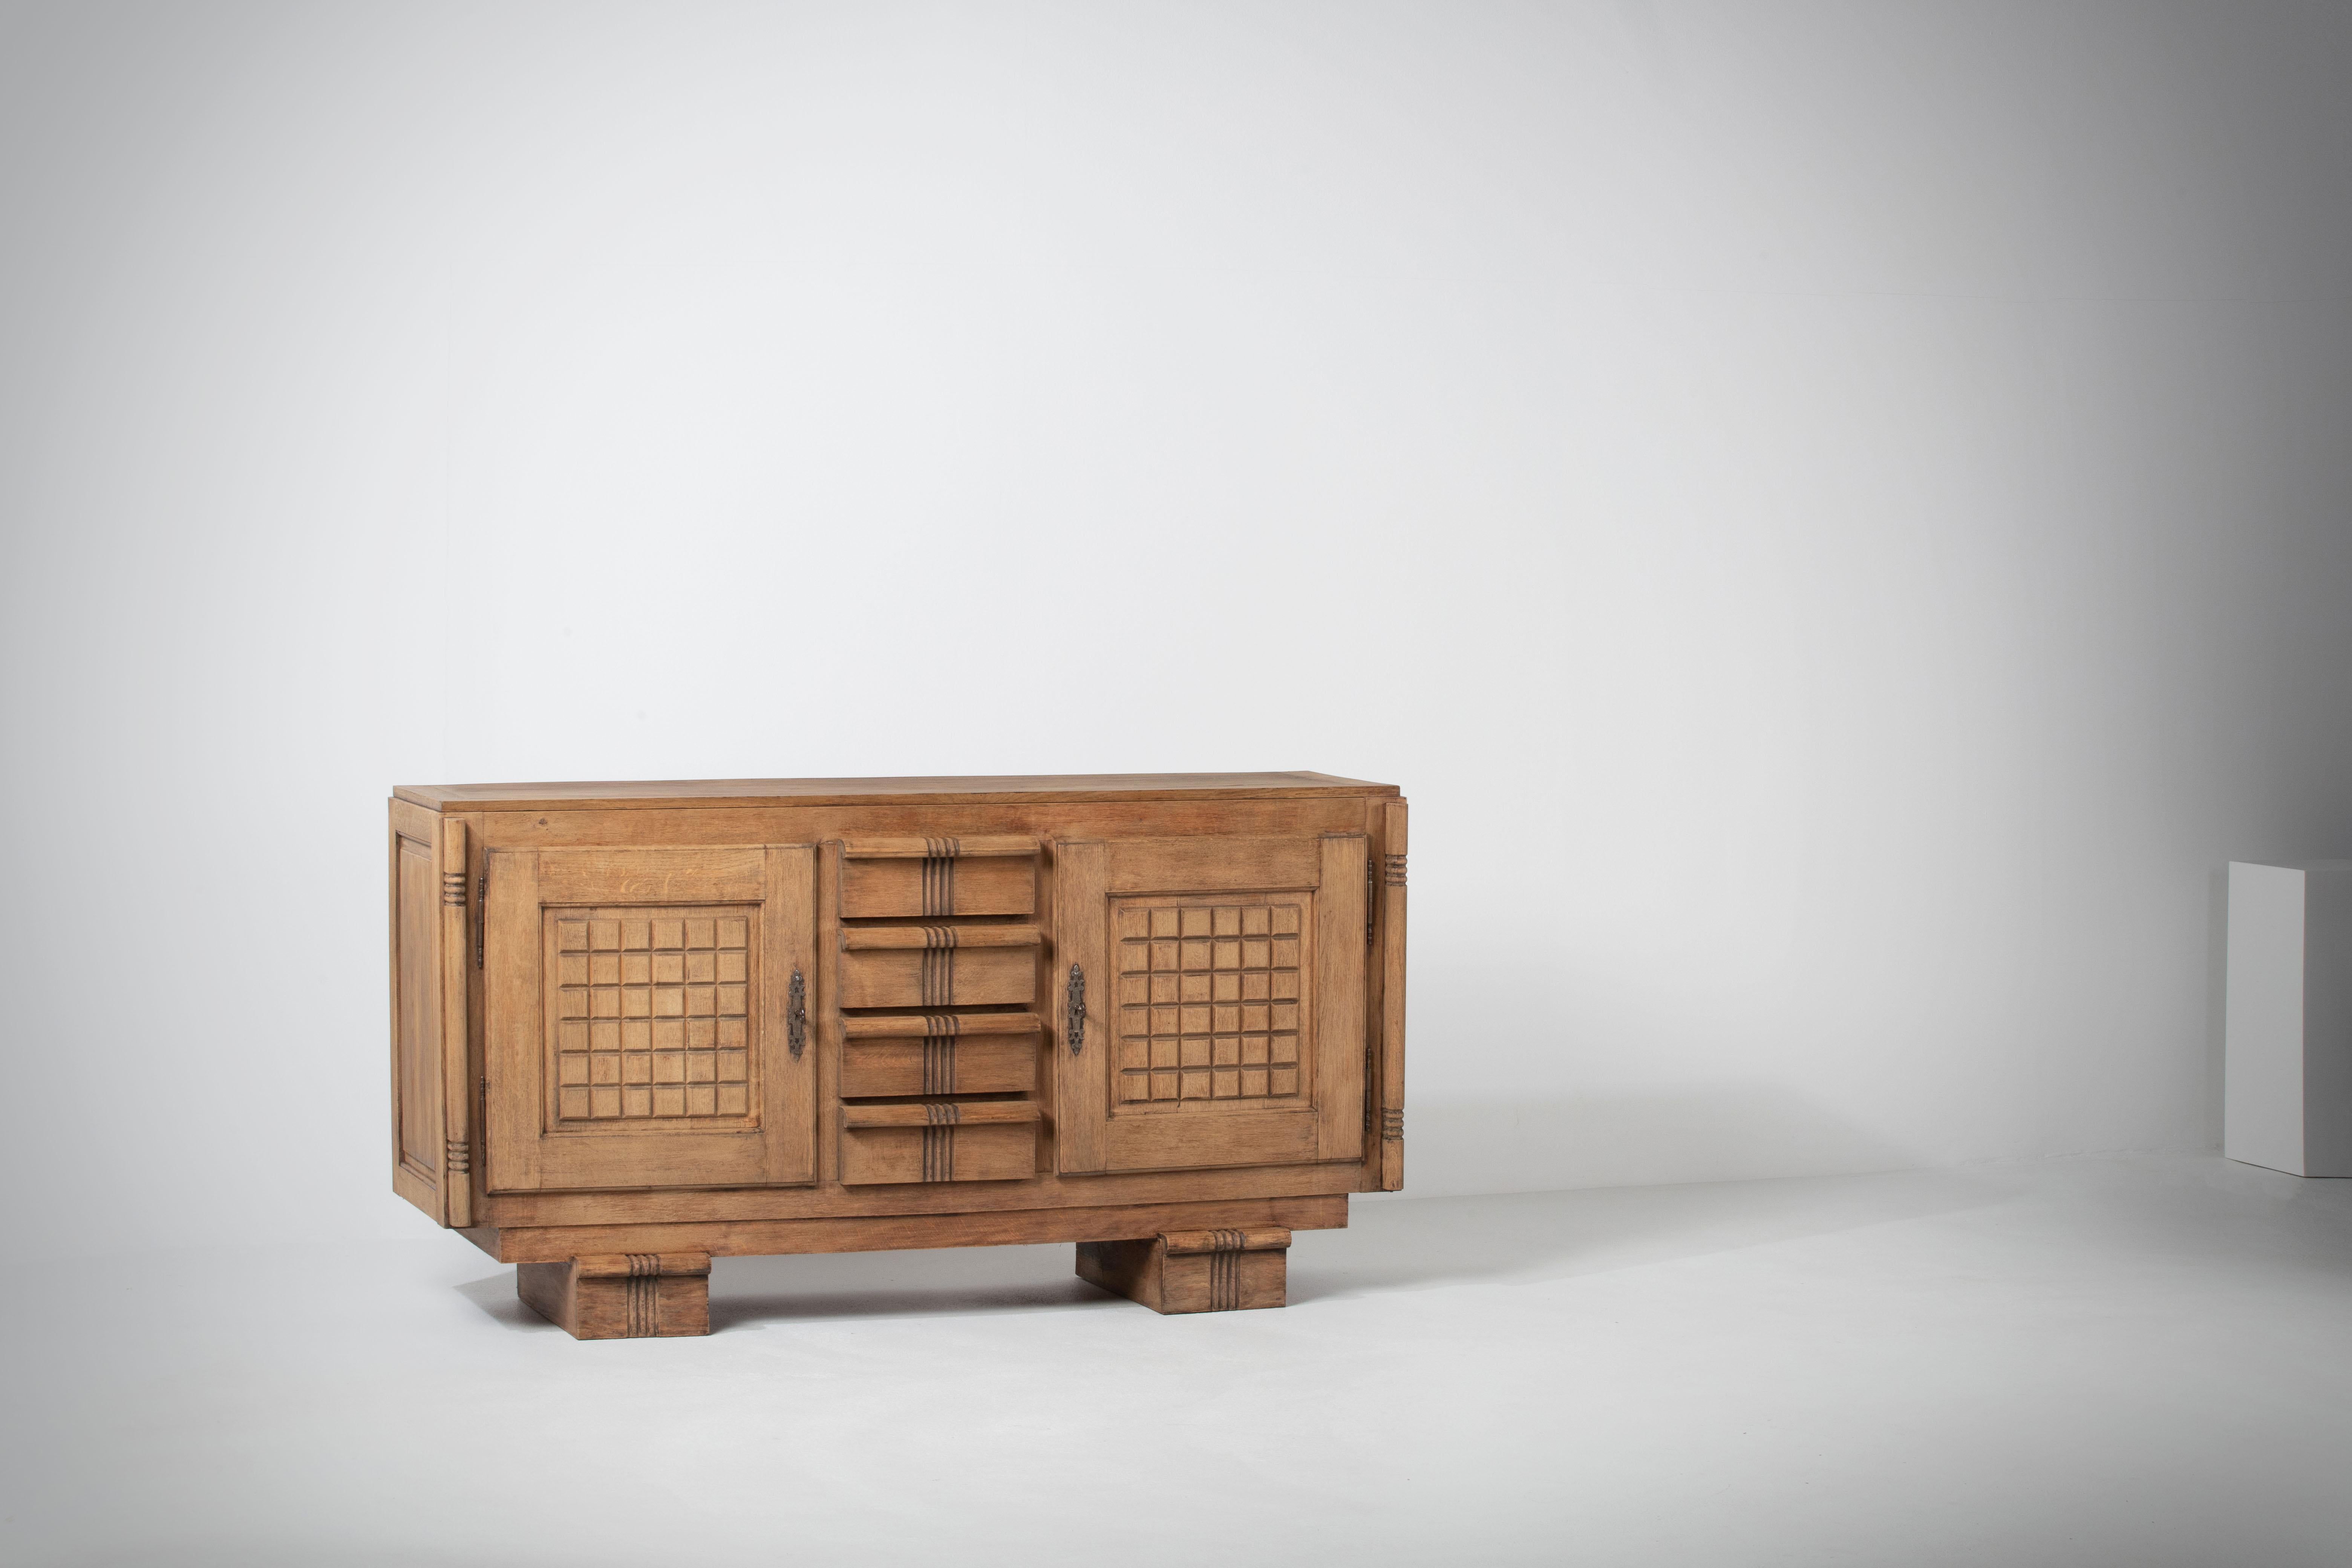 Large Credenza, solid oak, France, reminiscent of the work of Charles Dudouyt, 1940s.
Large Art Deco Brutalist sideboard. 
The credenza consists of two storage facilities and covered with very detailed designed doors, in the center, drawers.
The